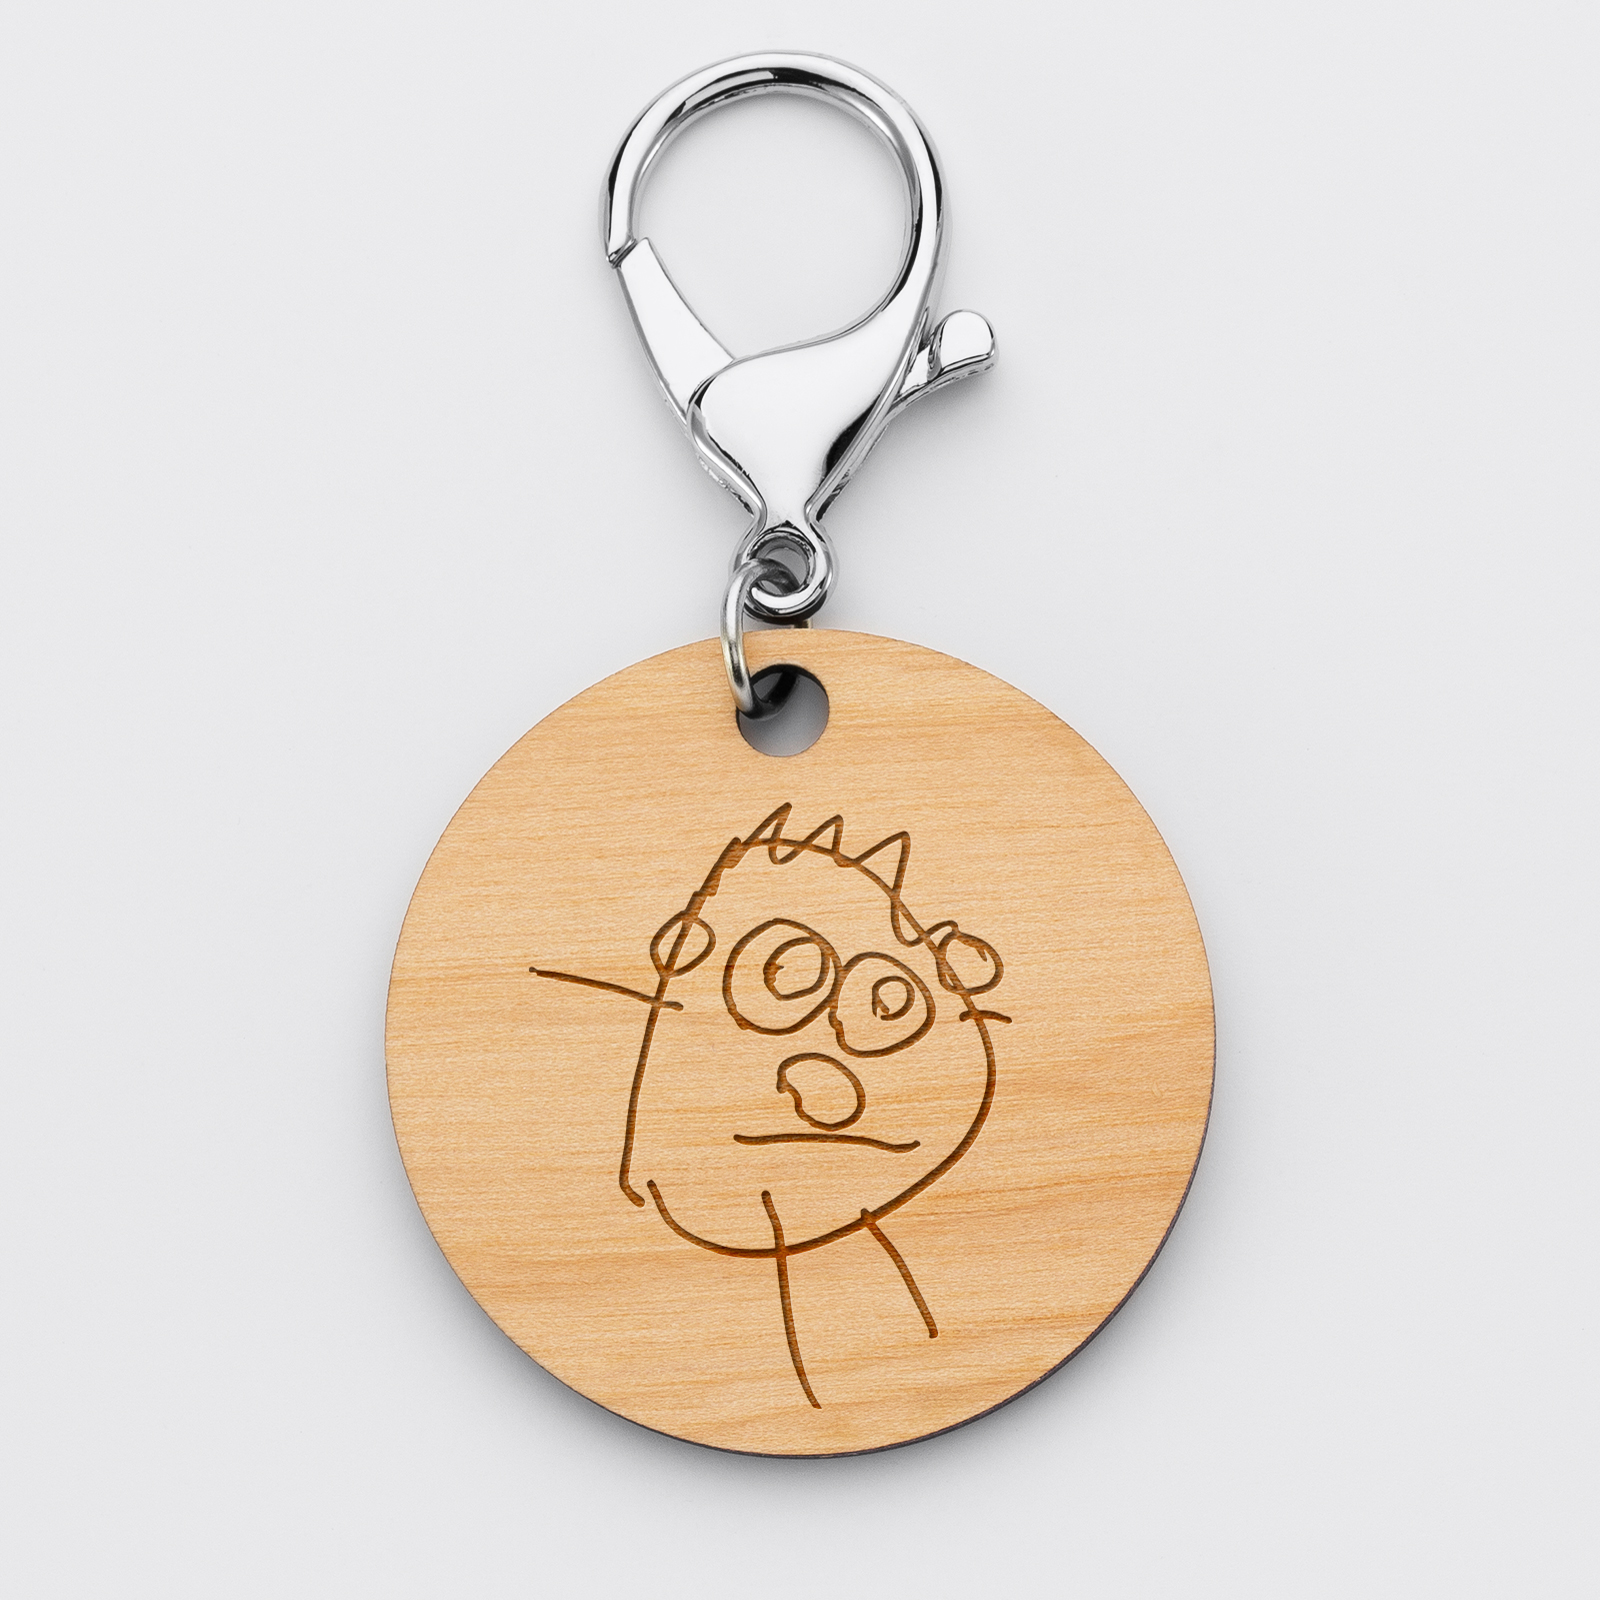 Personalised keyring engraved wooden disc 50mm